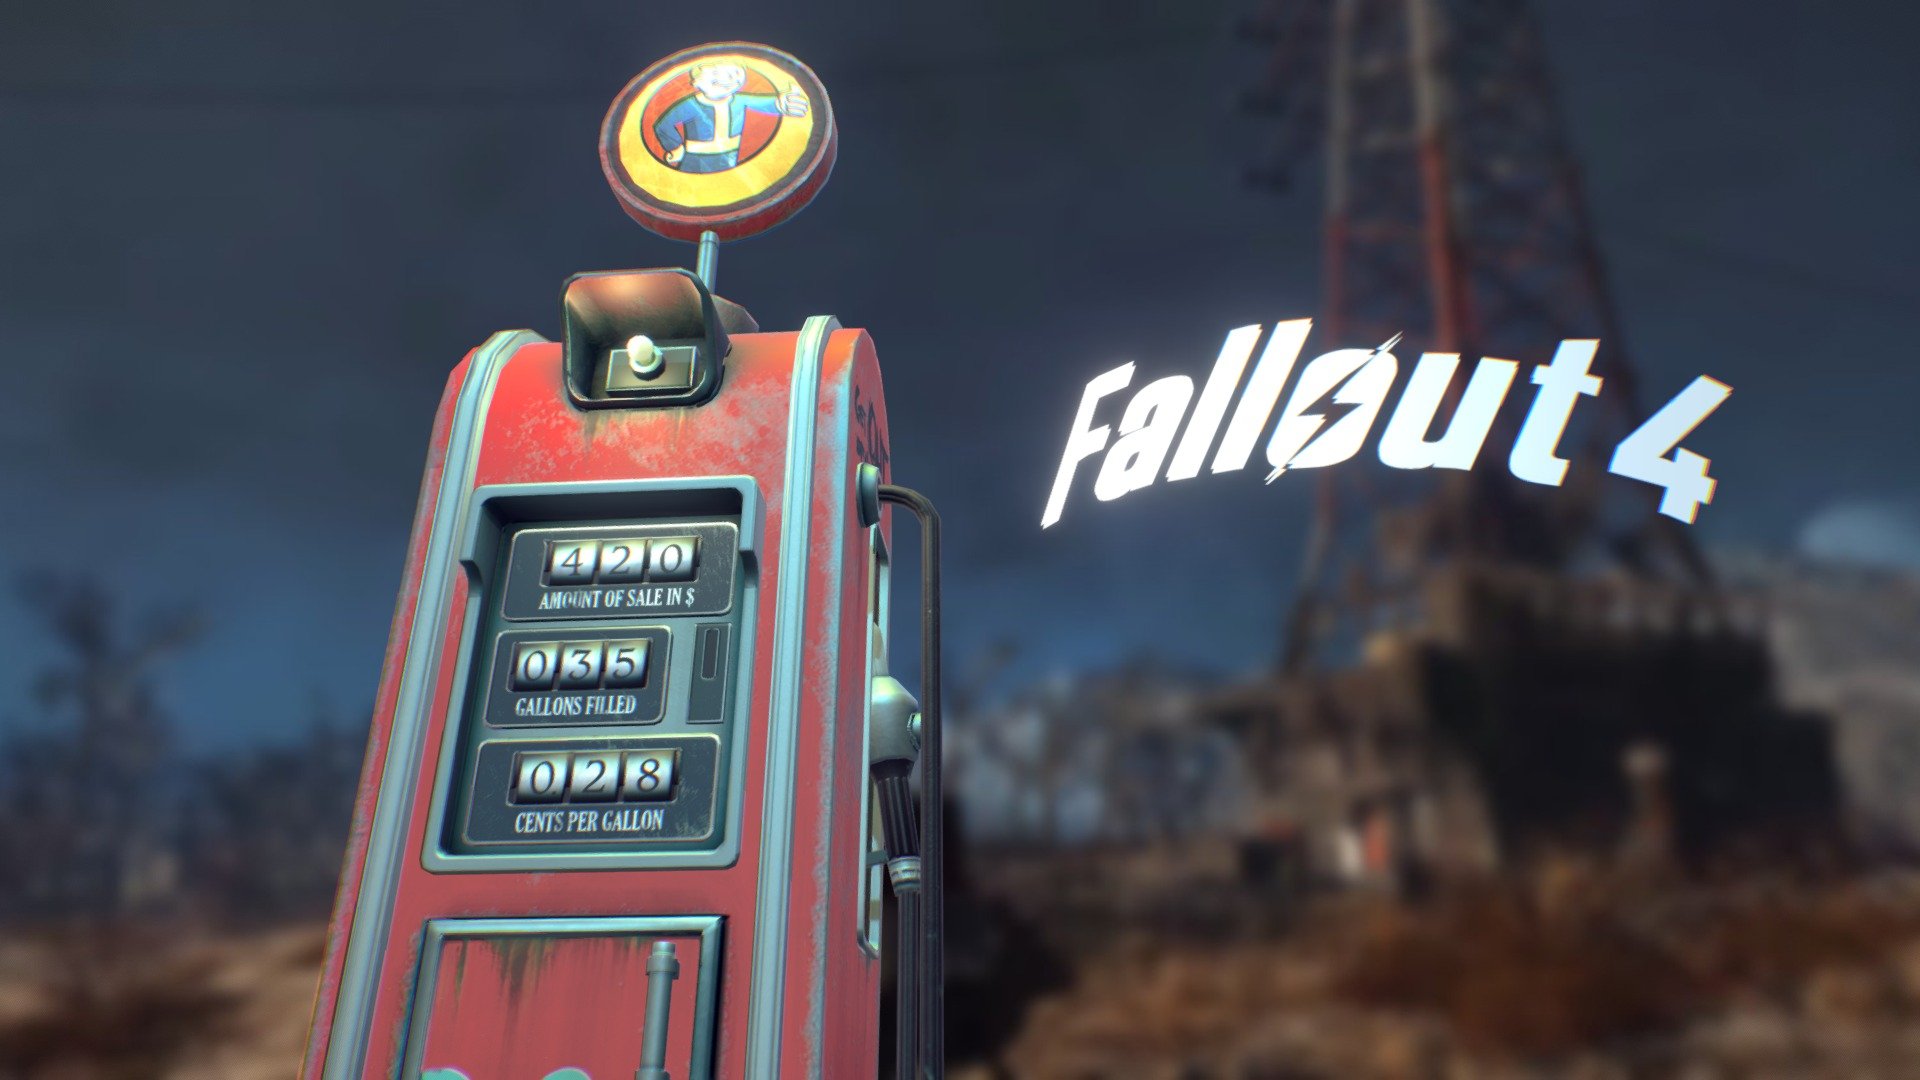 Hello! I am back with another one of my Fallout 4 fan-art projects. This one has kind of a special meaning. If you like to read about it, check my WIP post on forum: https://forum.sketchfab.com/t/fallout-4-style-assets-making-of/5307/16

Don't forget to like and comment, if you like my work! Thanks!
For more of my models, visit: www.electrocactus.com - Retro Gas Pump - 3D model by Kaspars Pavlovskis (@kaspars_3d) 3d model